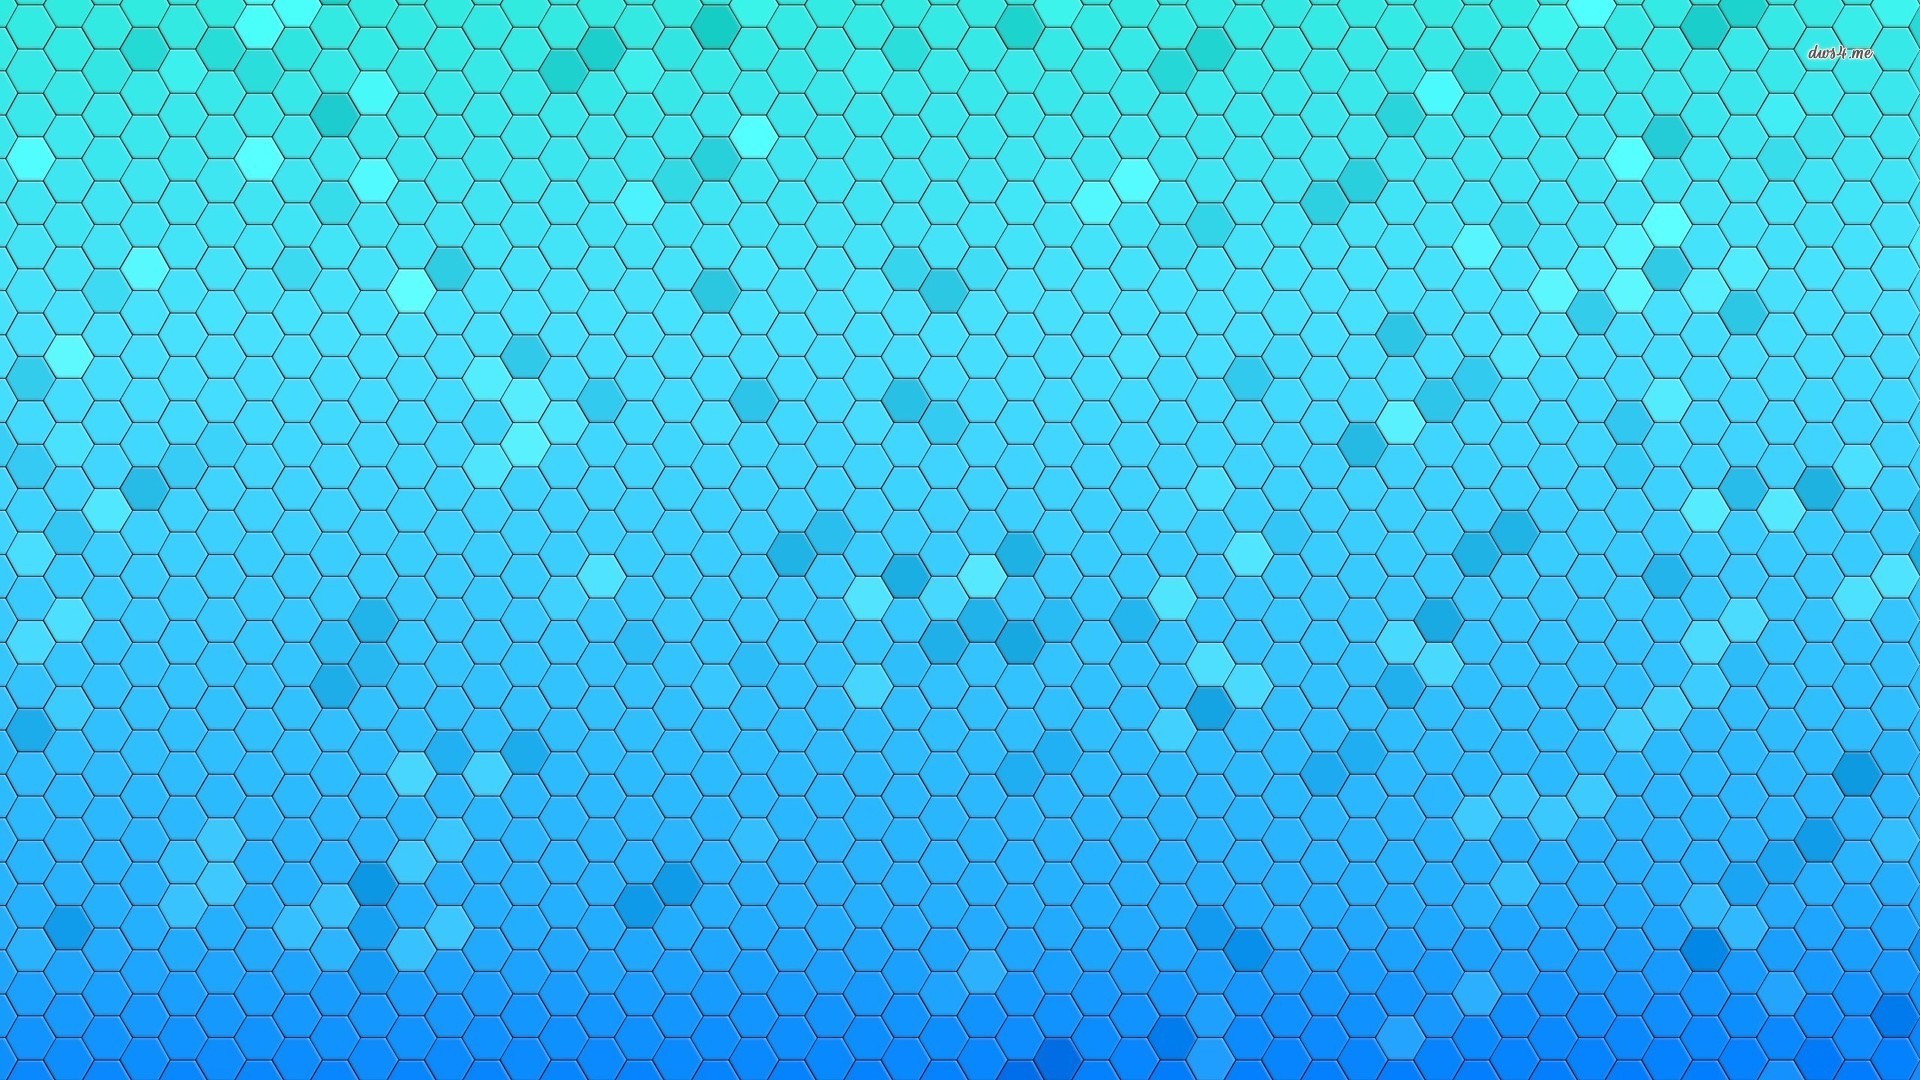 1920x1080 Blue Honeycomb Pattern Blue Honeycomb Pattern wallpapers HD free - 390205